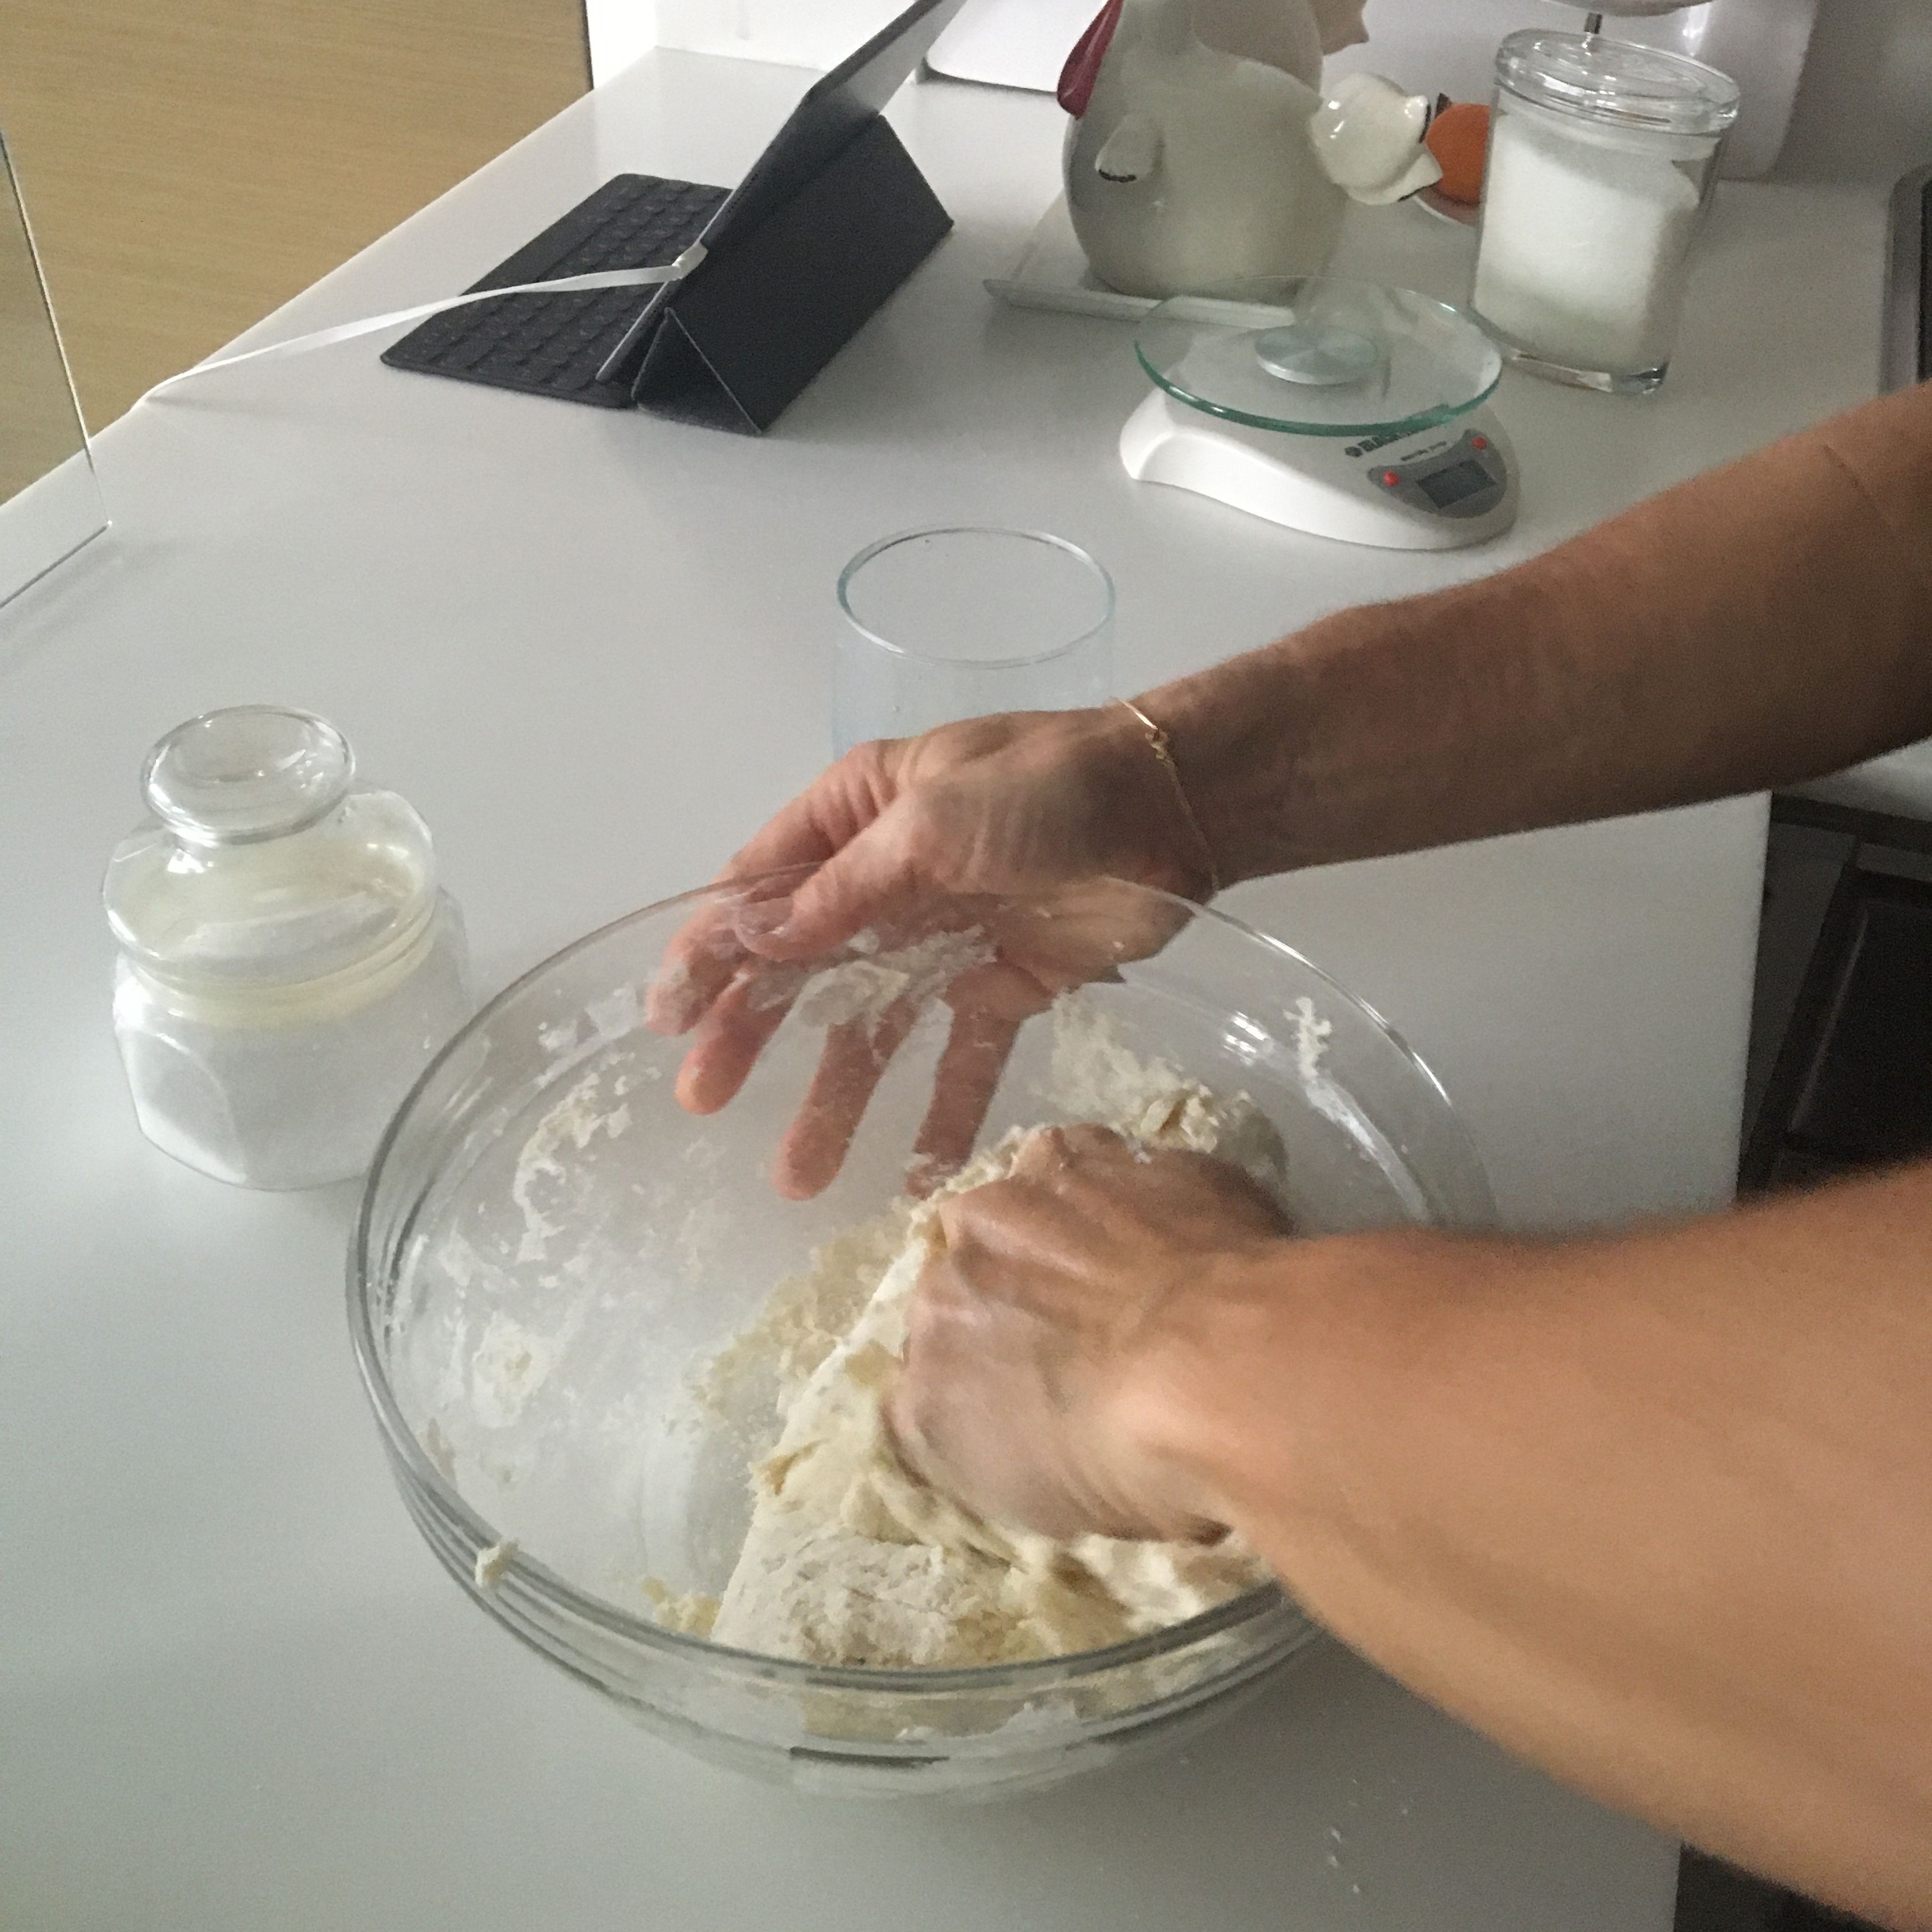 Add the water to the flour mixture and mix in to create a dough